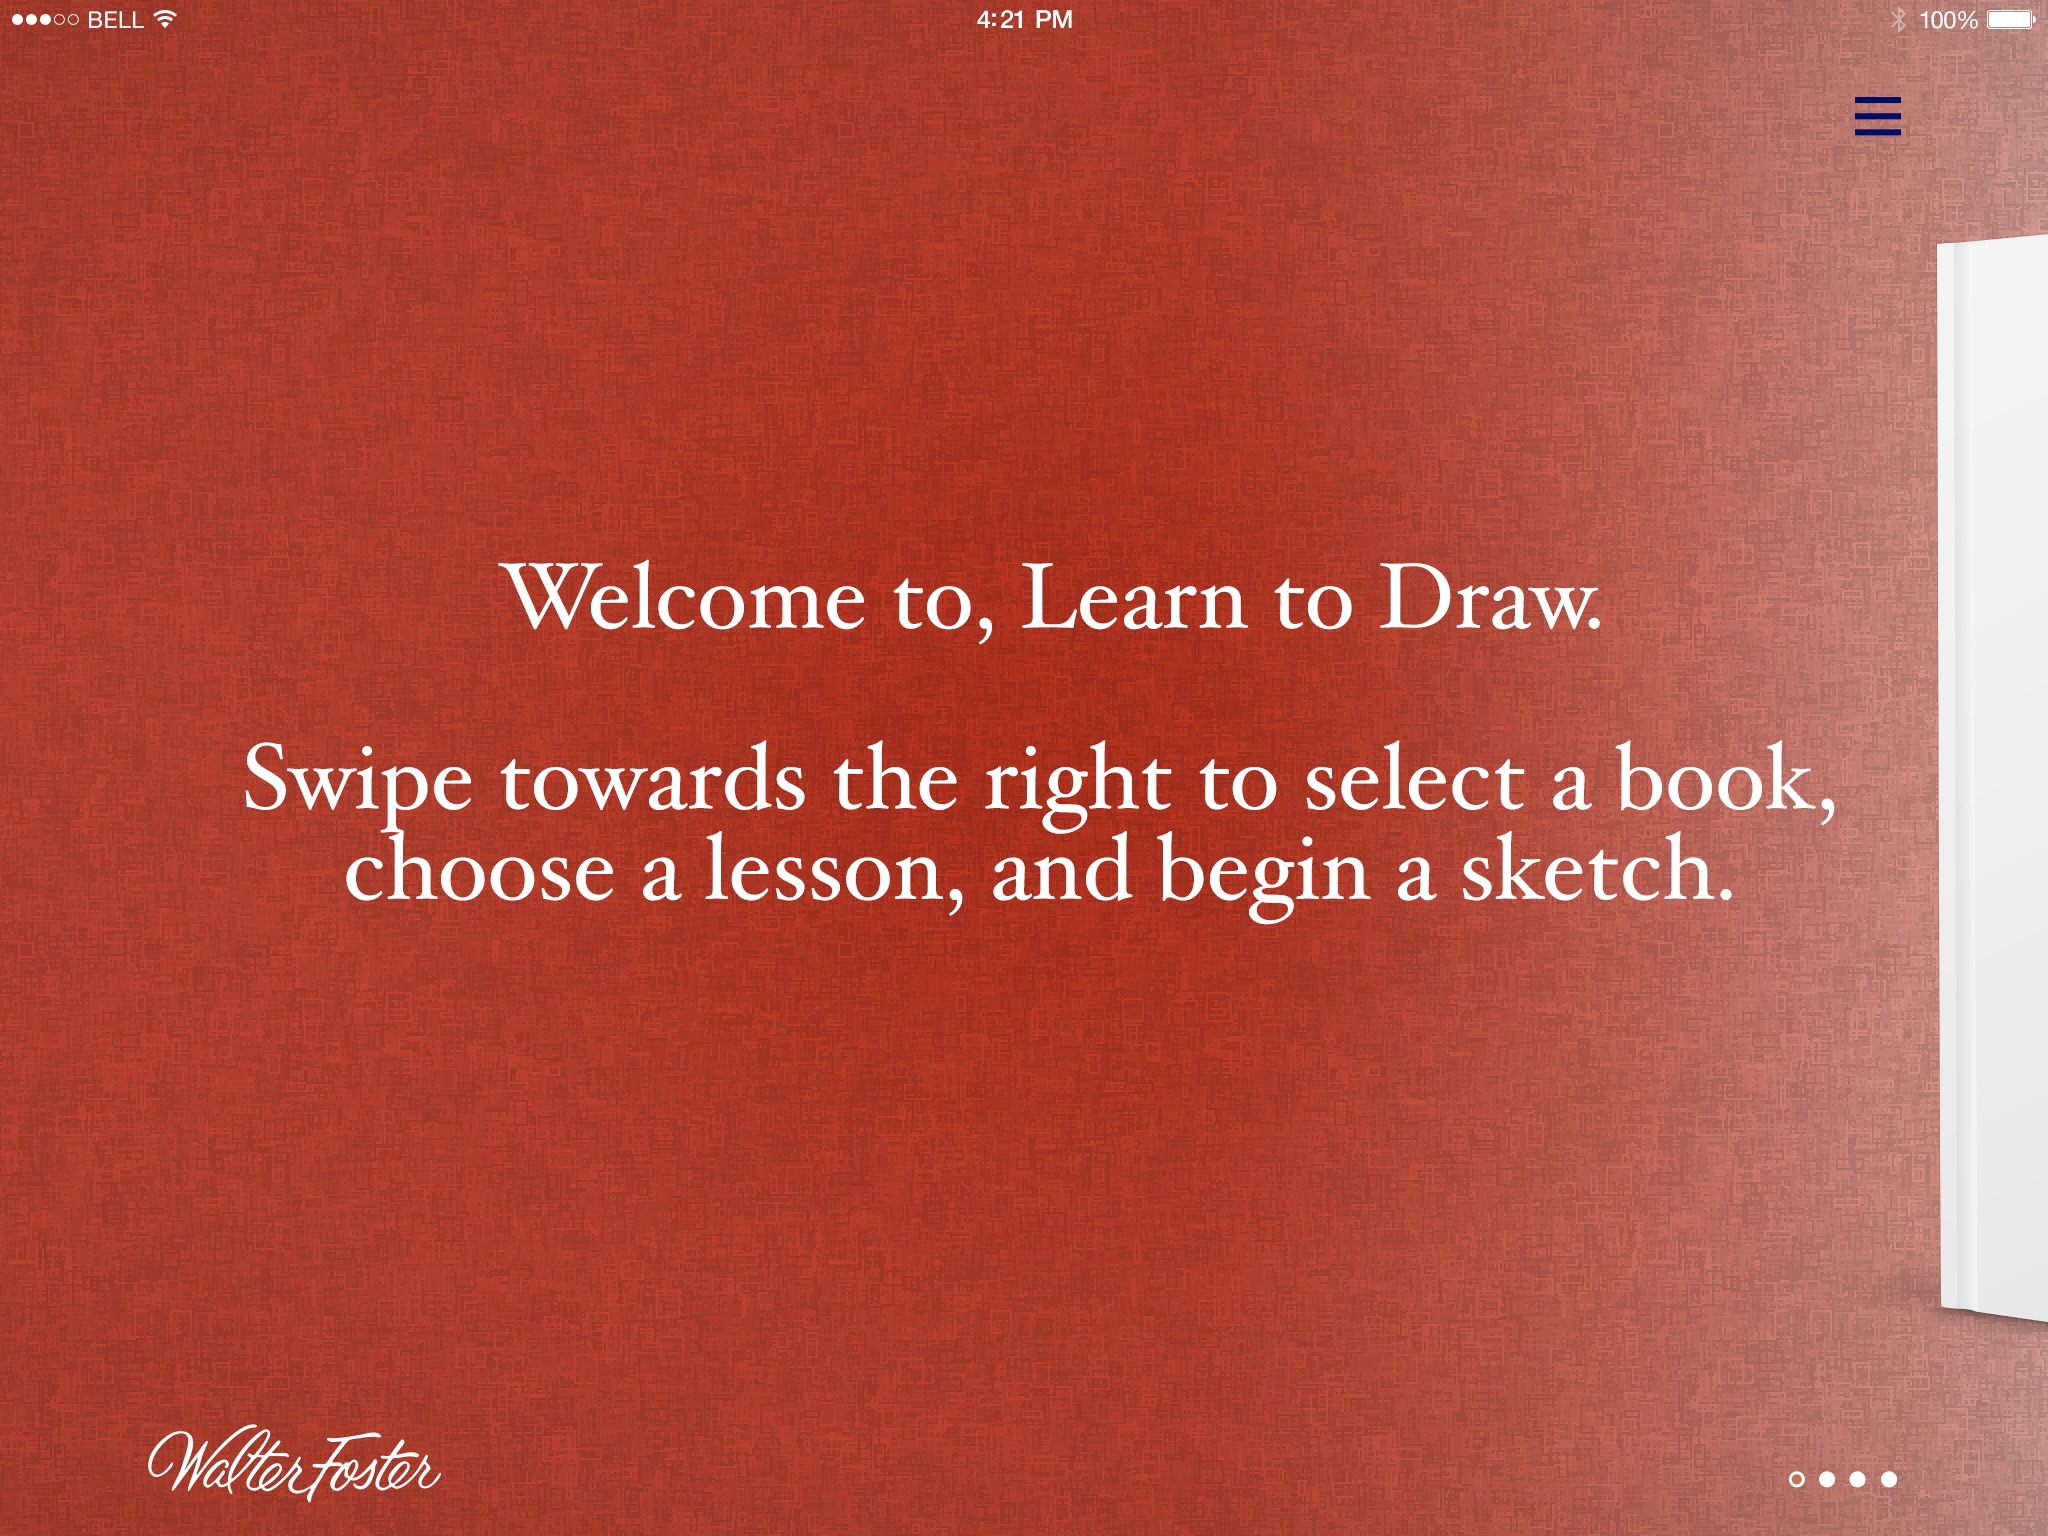 Learning To Draw screenshot 4